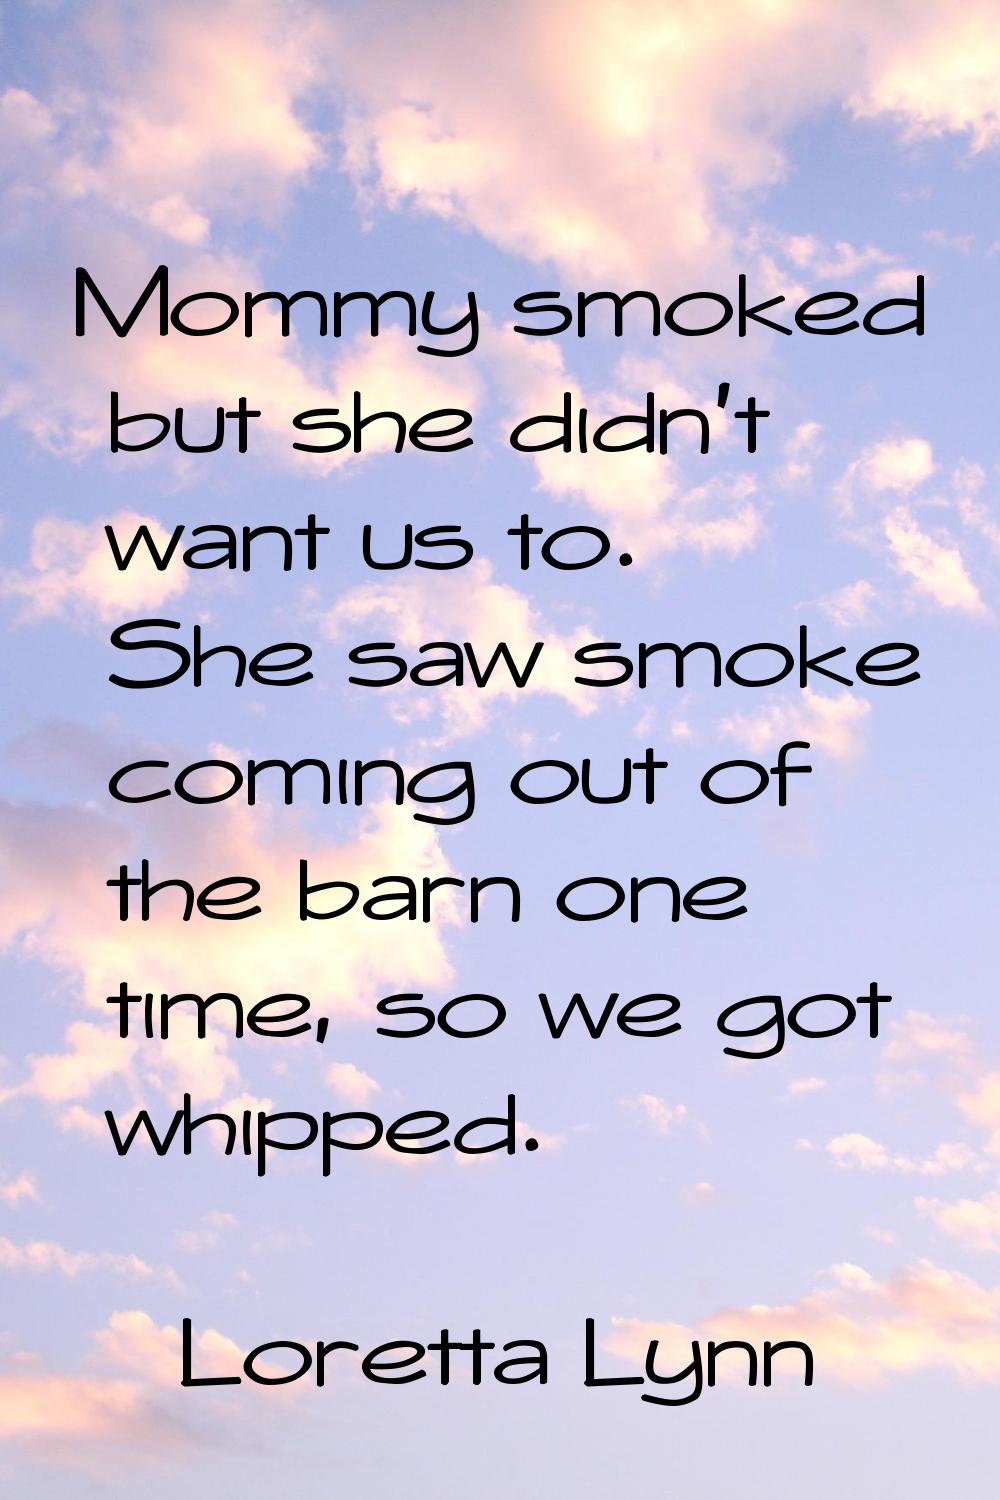 Mommy smoked but she didn't want us to. She saw smoke coming out of the barn one time, so we got wh